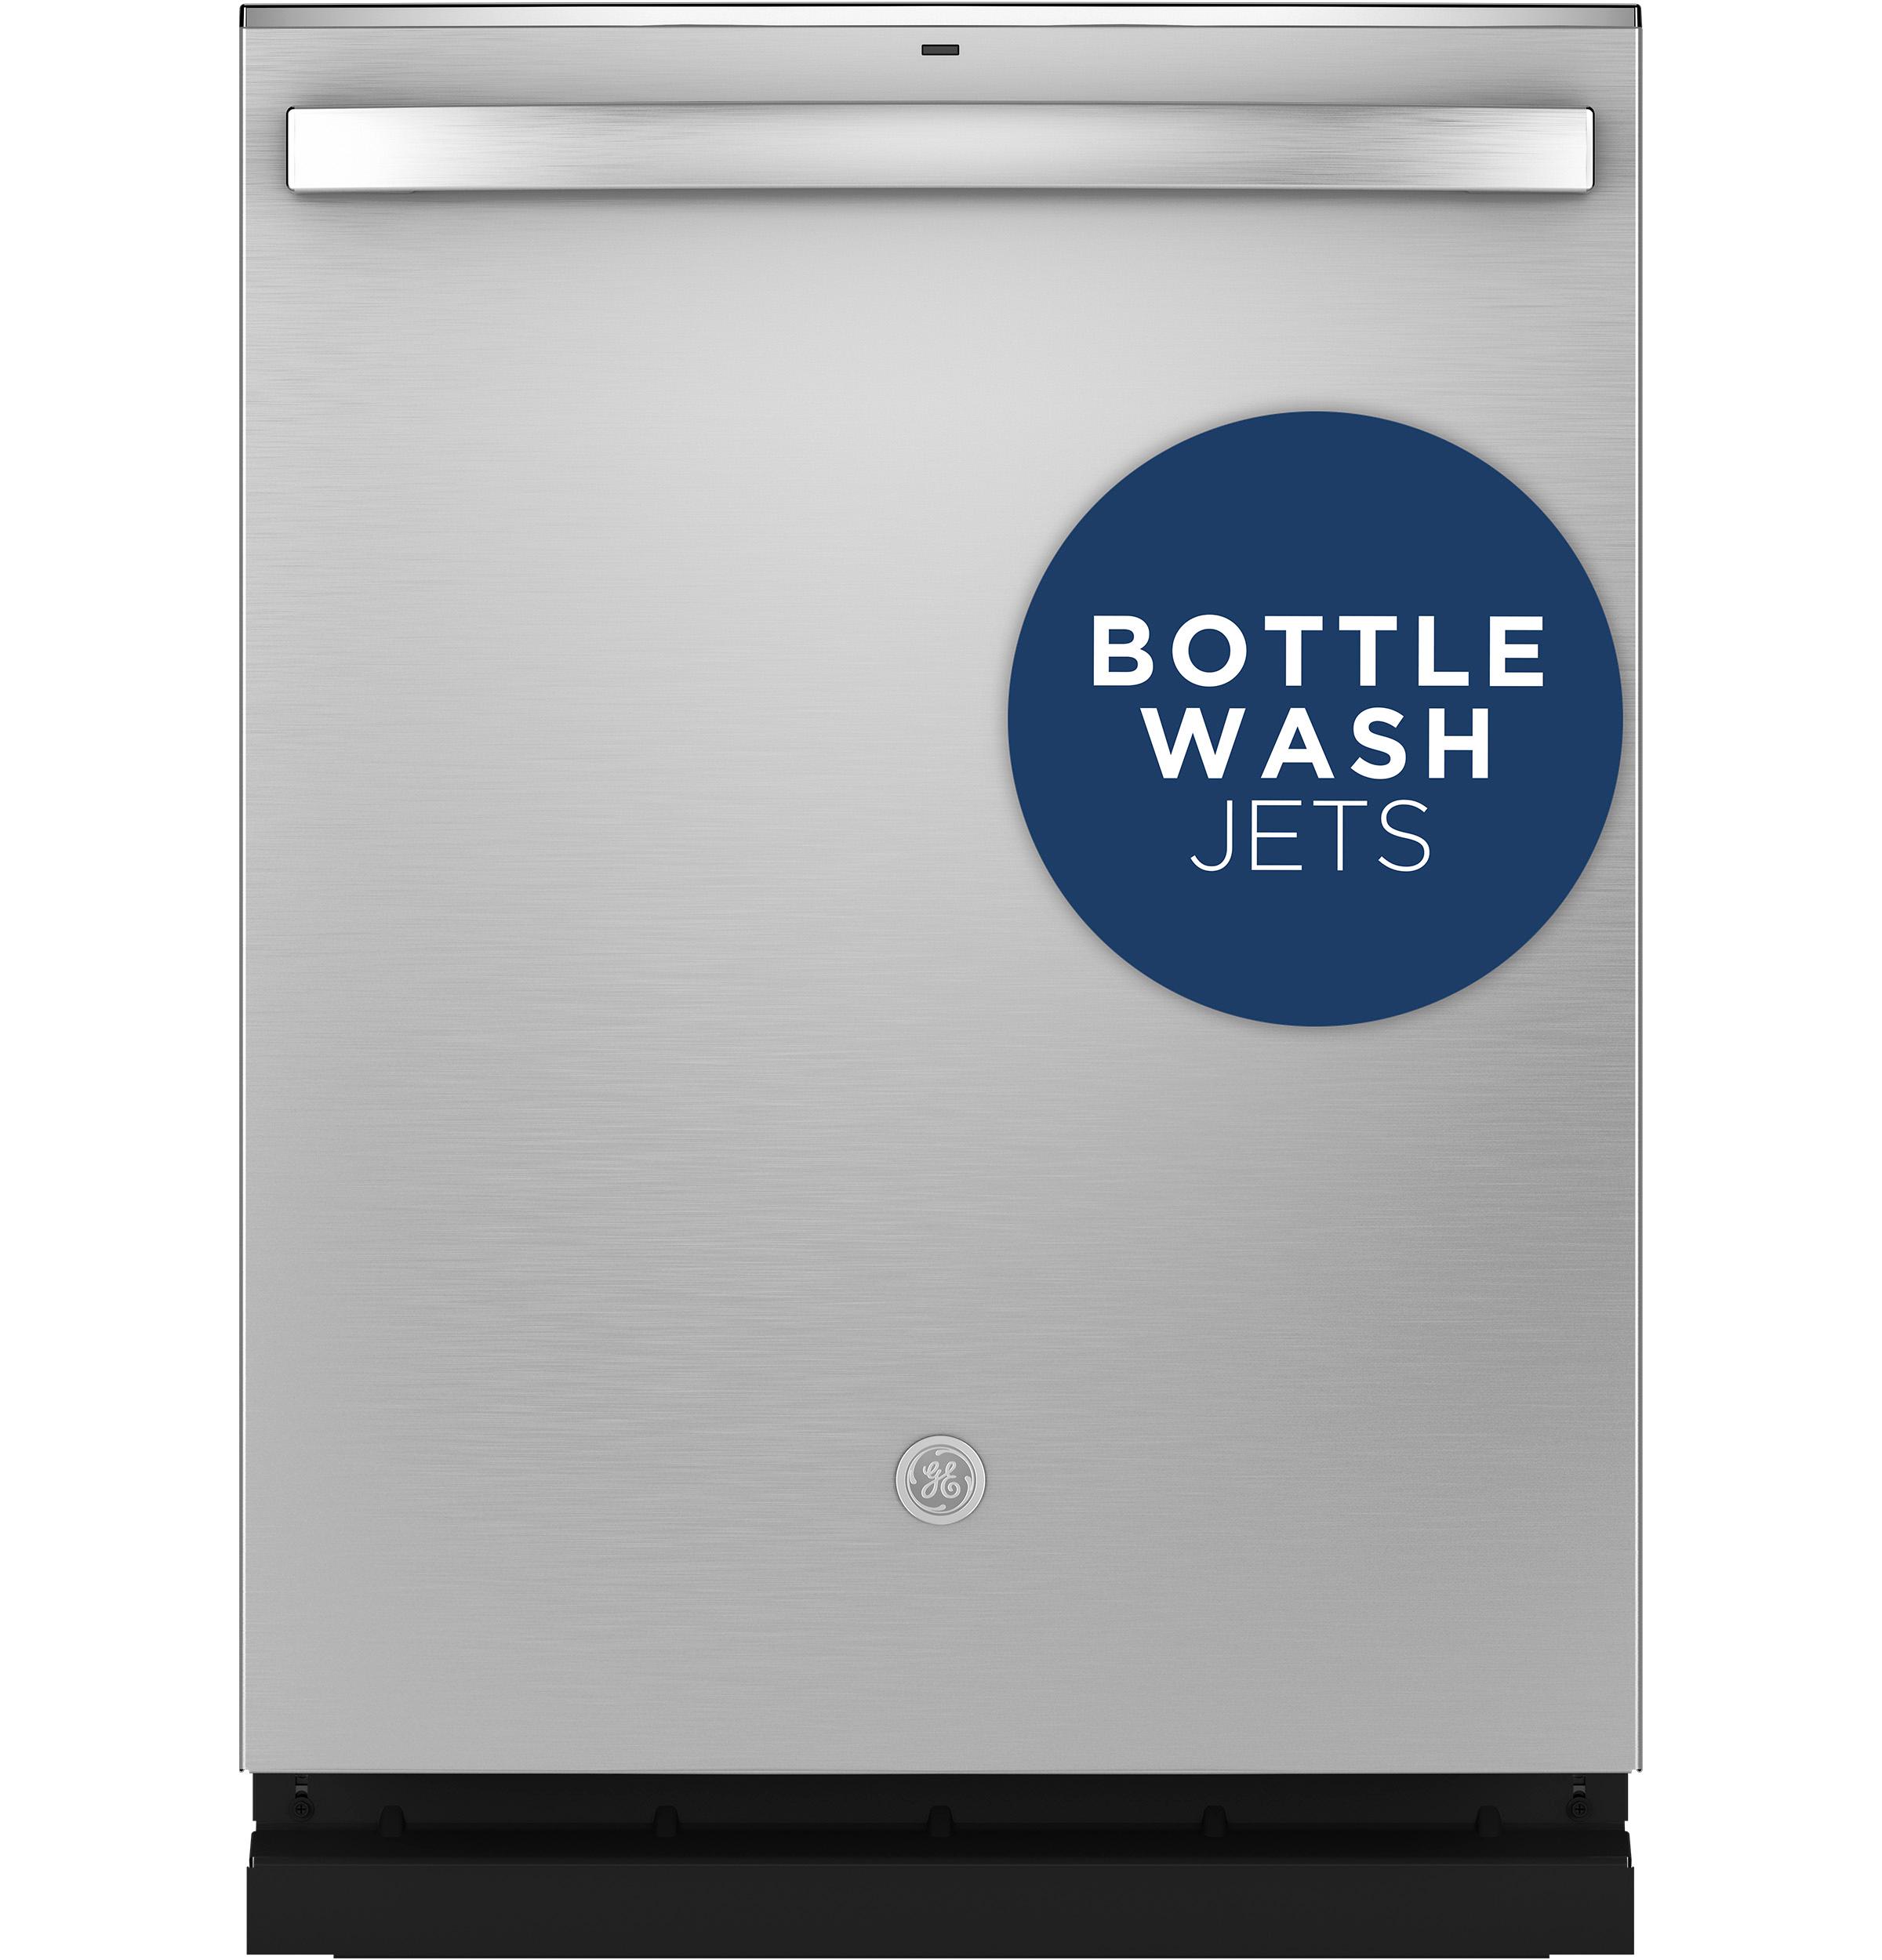 GE® Fingerprint Resistant Top Control with Stainless Steel Interior Dishwasher with Sanitize Cycle & Dry Boost with Fan Assist